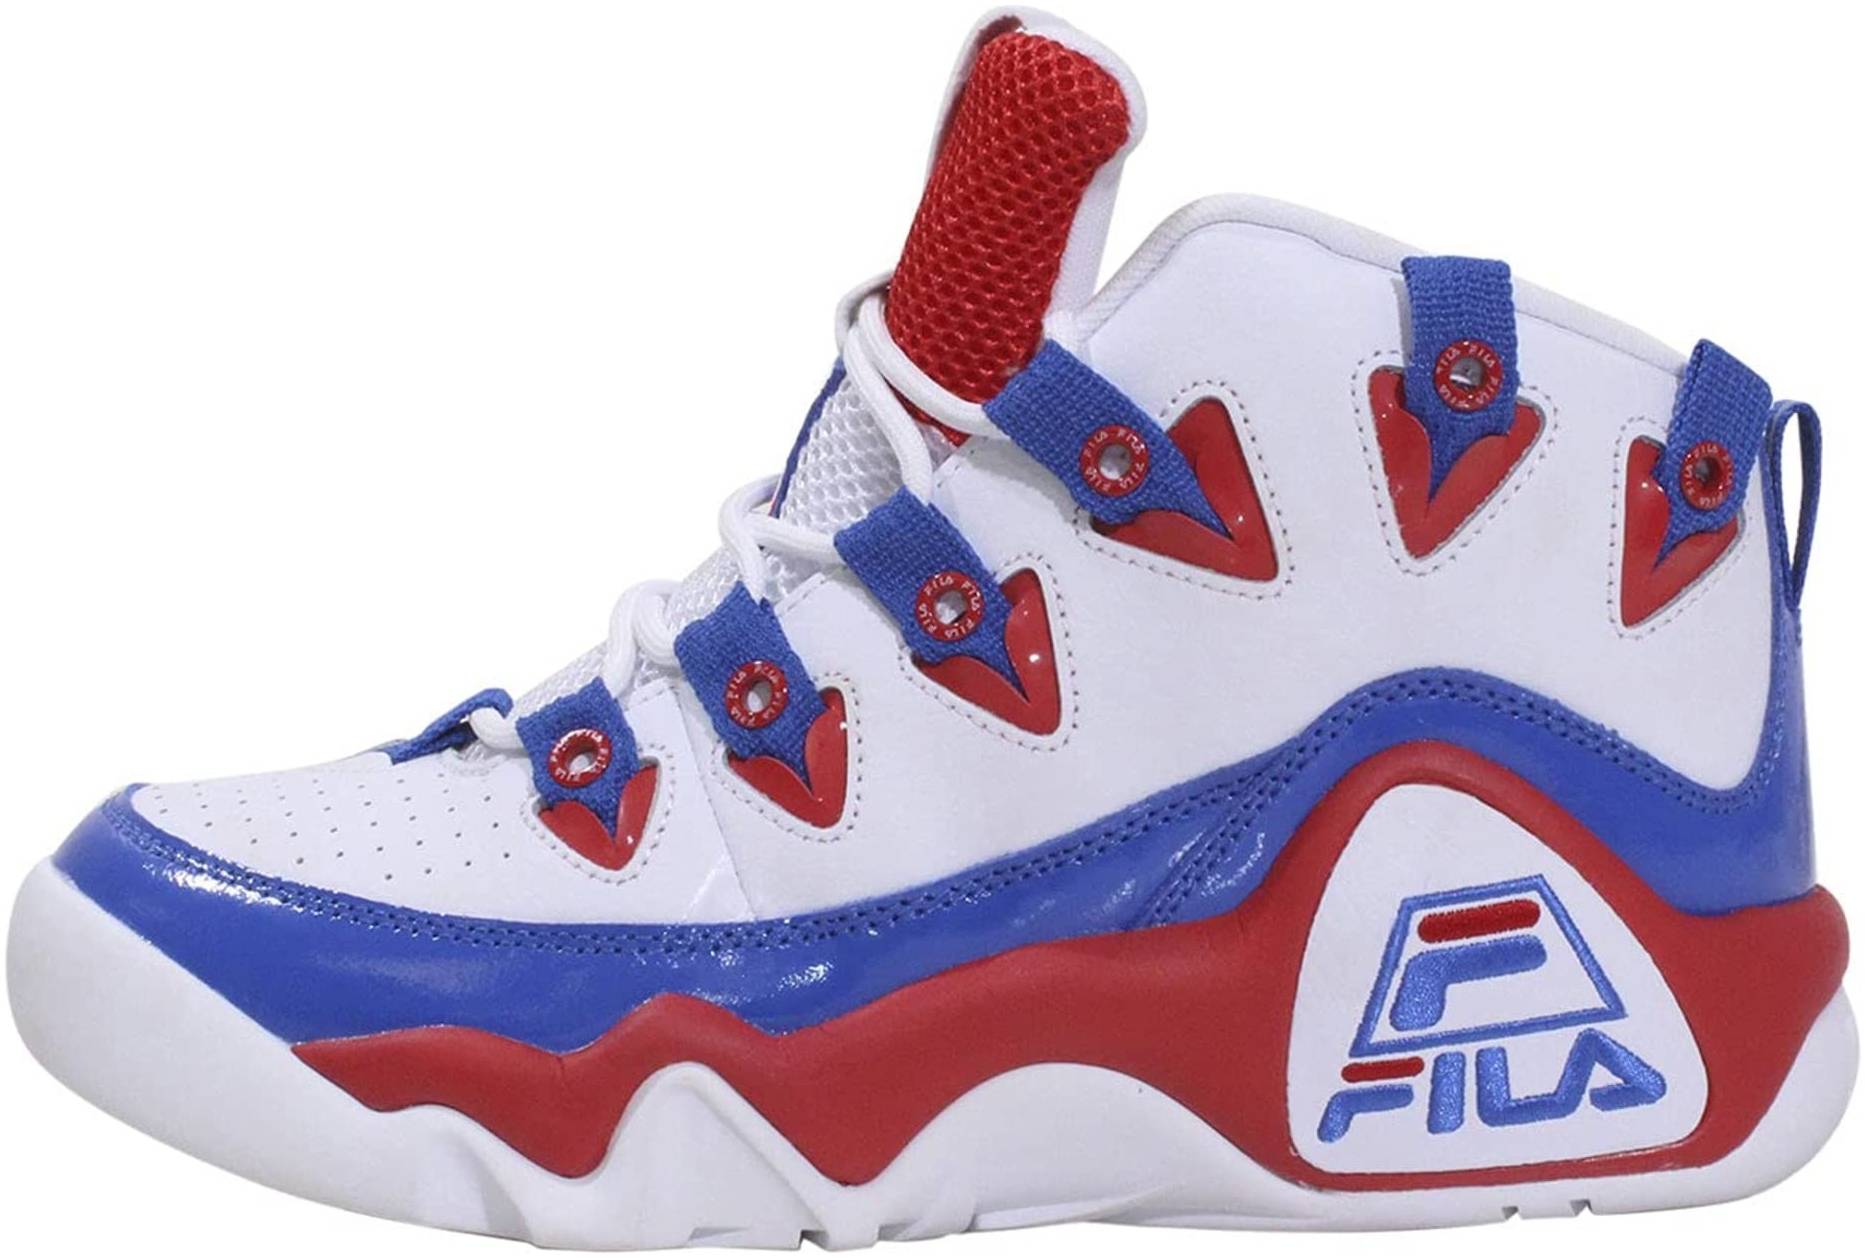 20+ Fila sneakers: Save up to 50%  RunRepeat